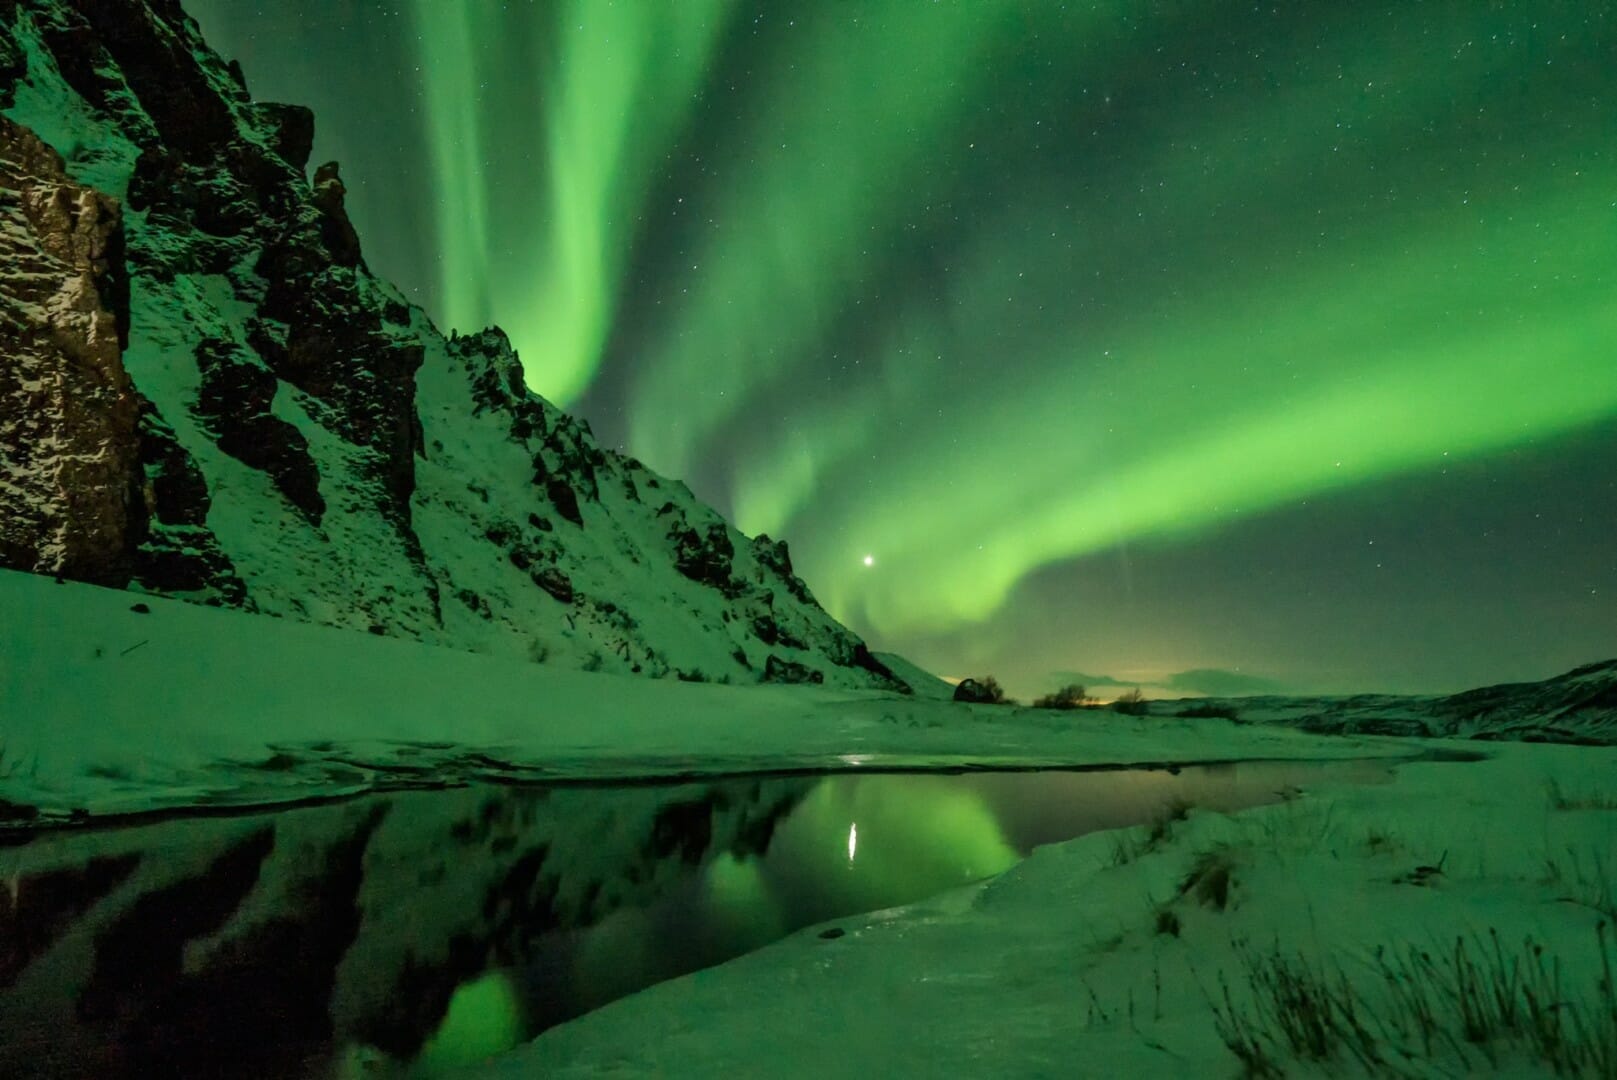 Journey to the magical Northern Lights